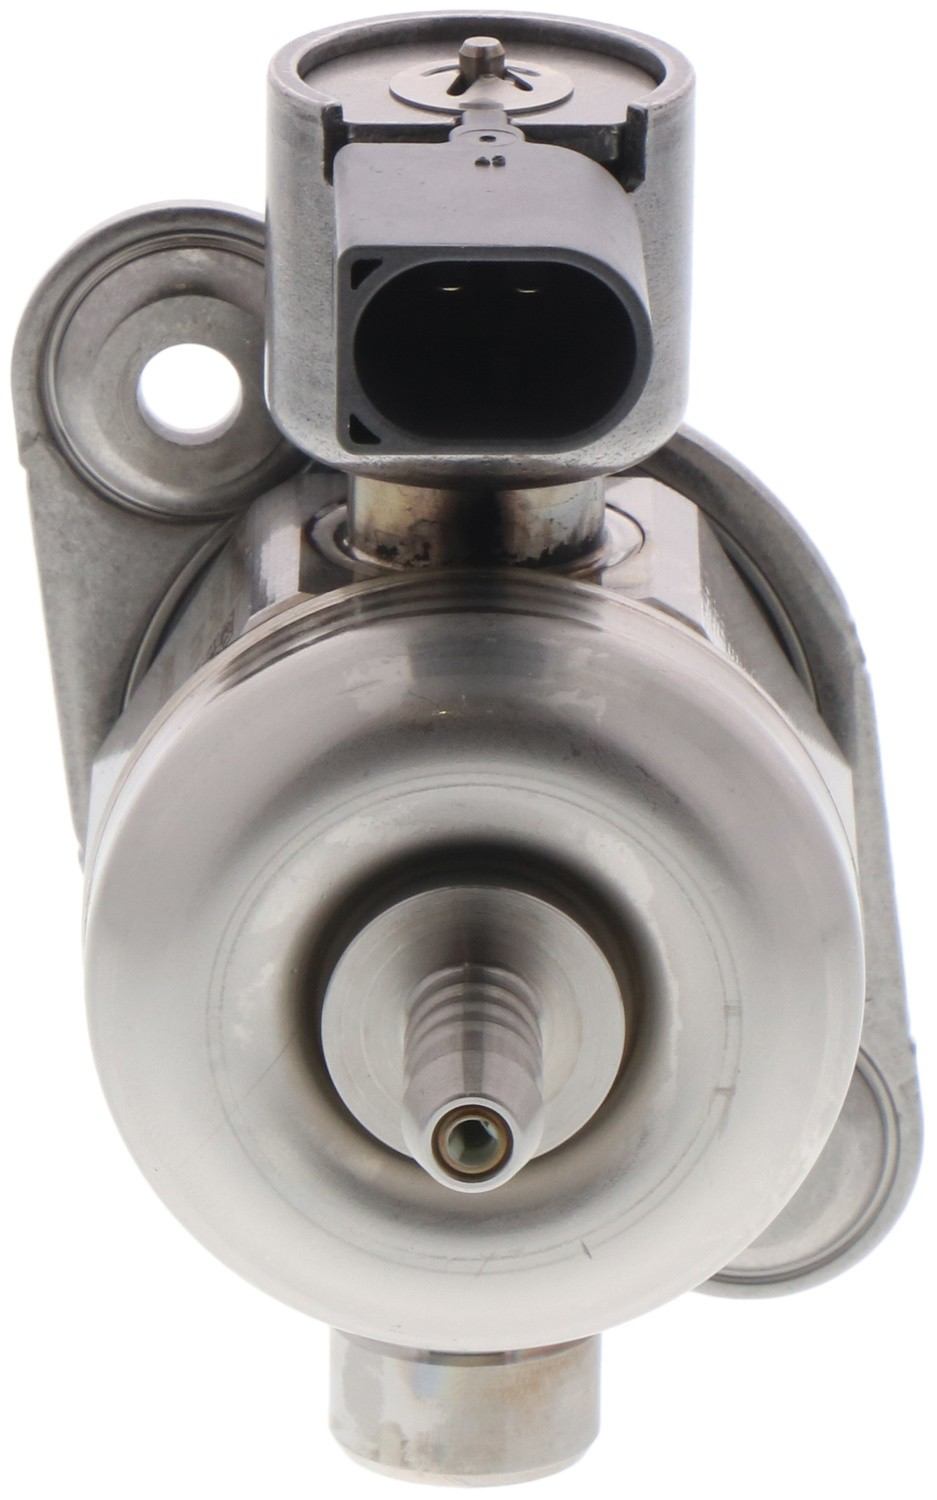 Front View of Direct Injection High Pressure Fuel Pump BOSCH 66809